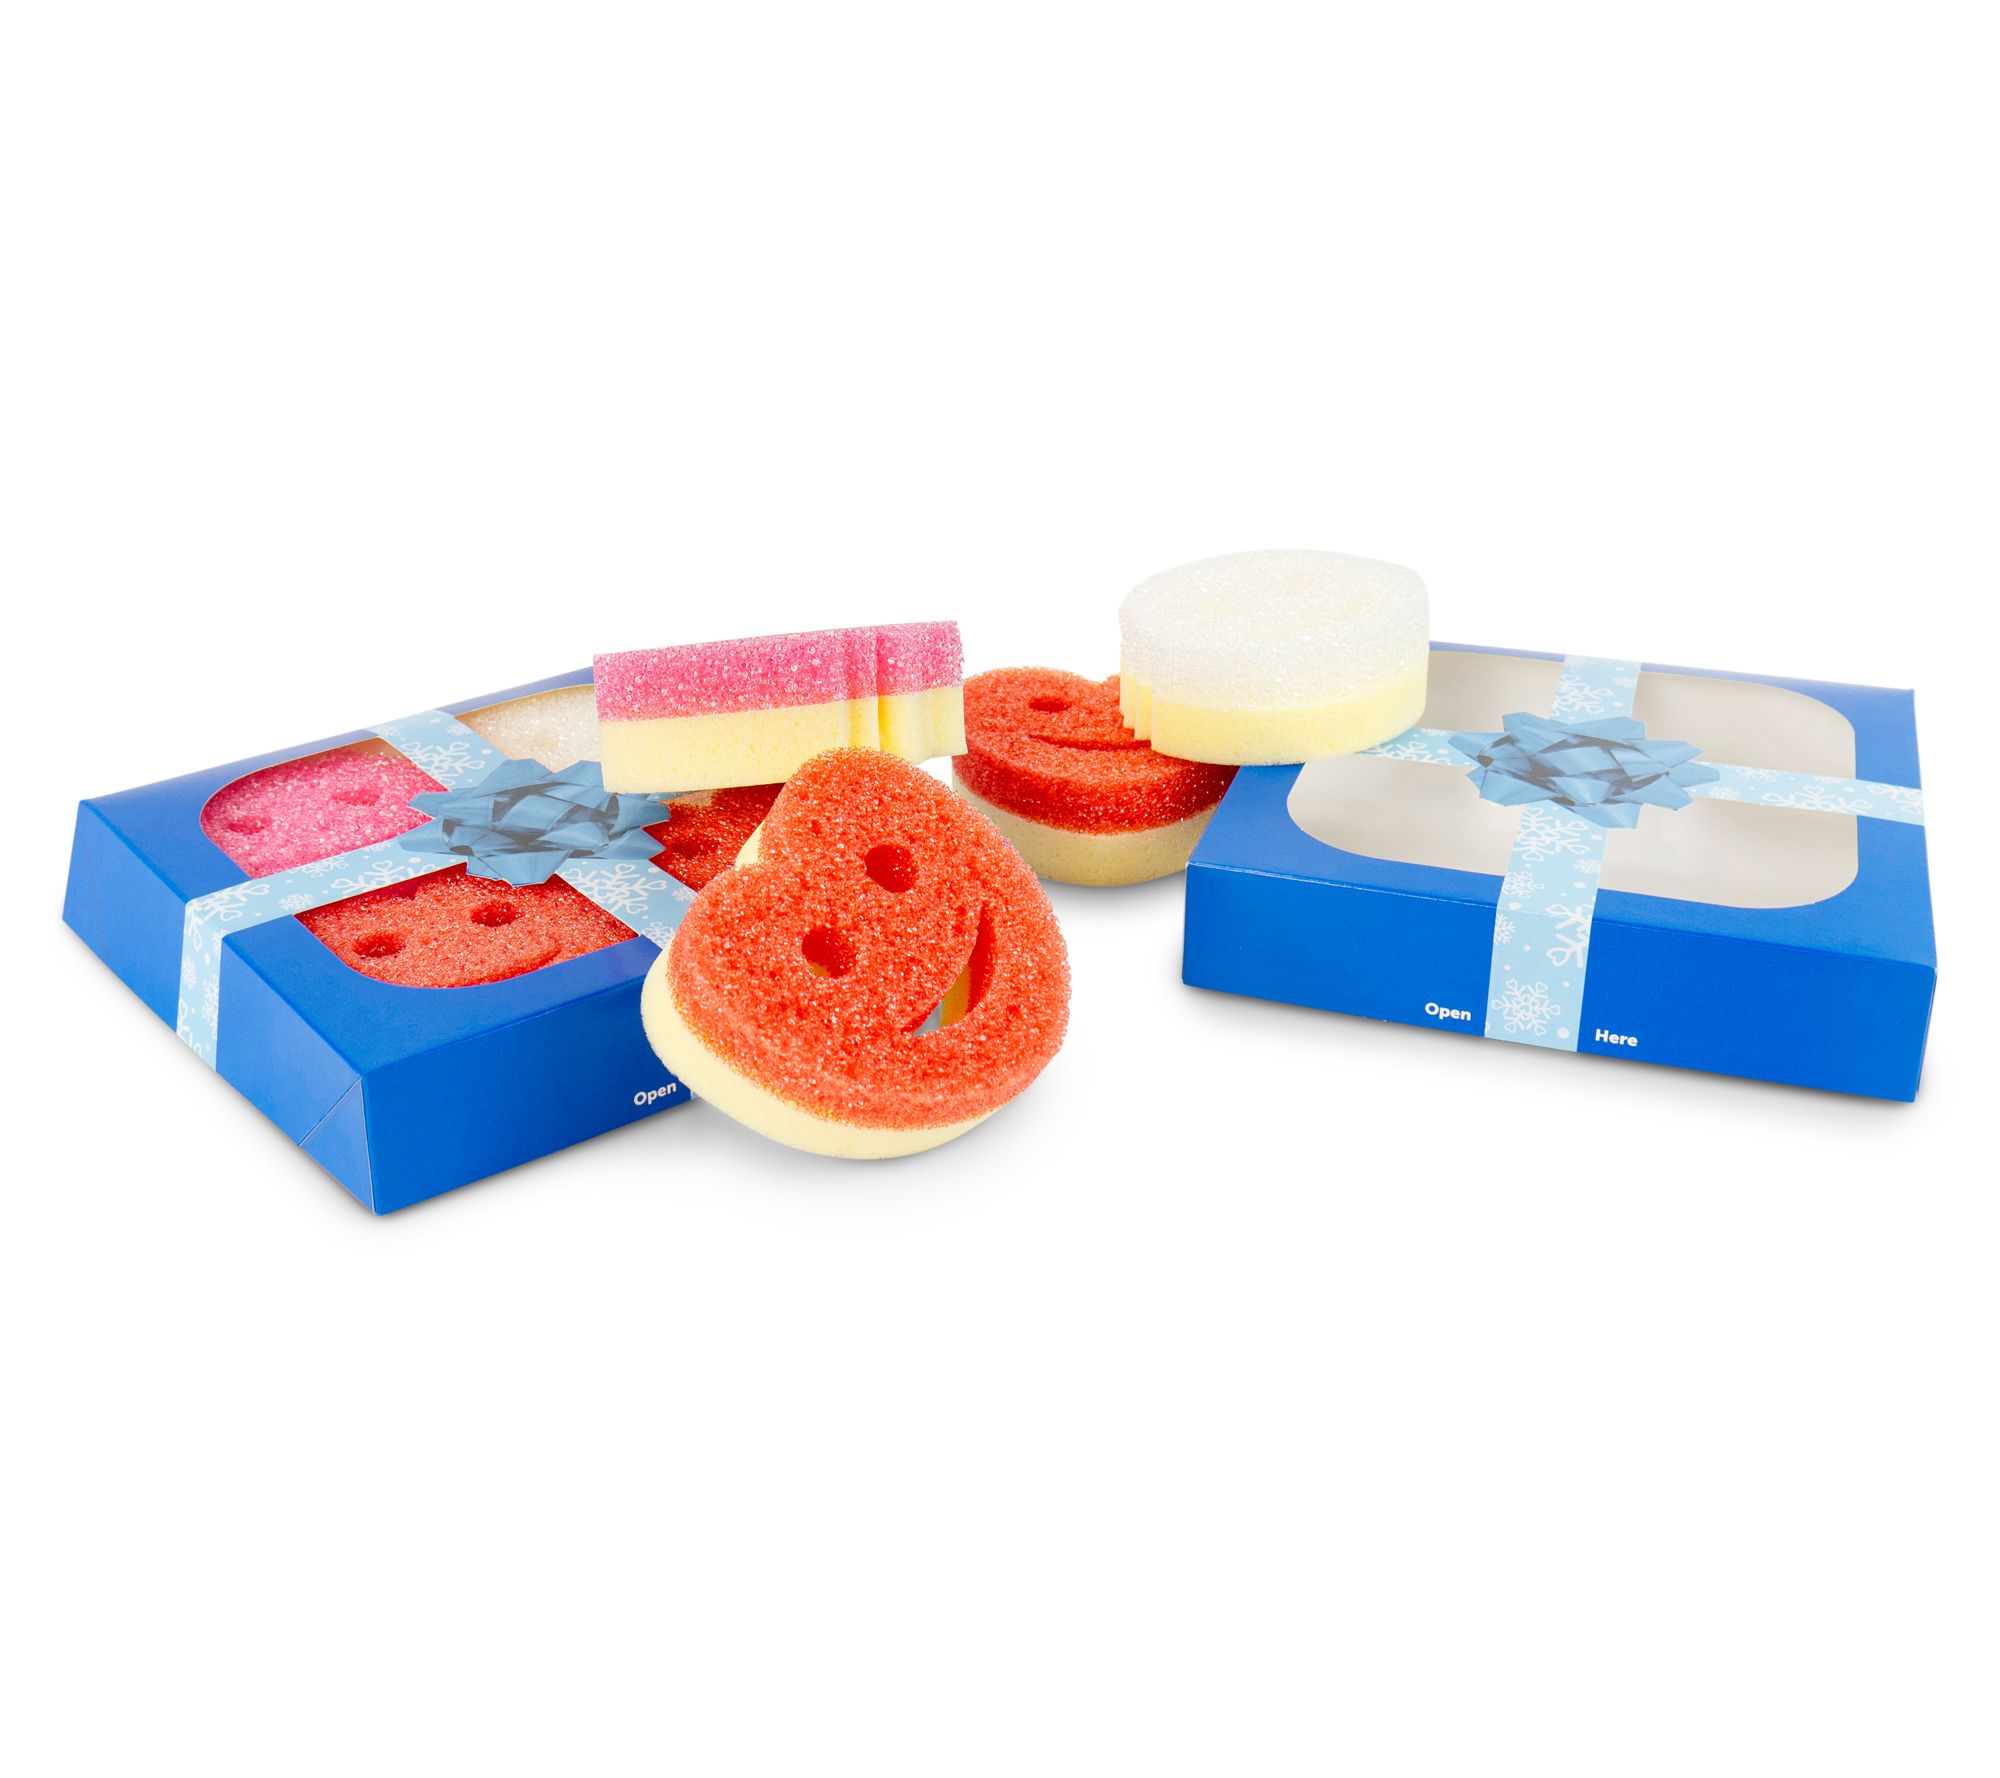 Scrub Mommy Double Sided Multi Color Sponge Set on QVC 